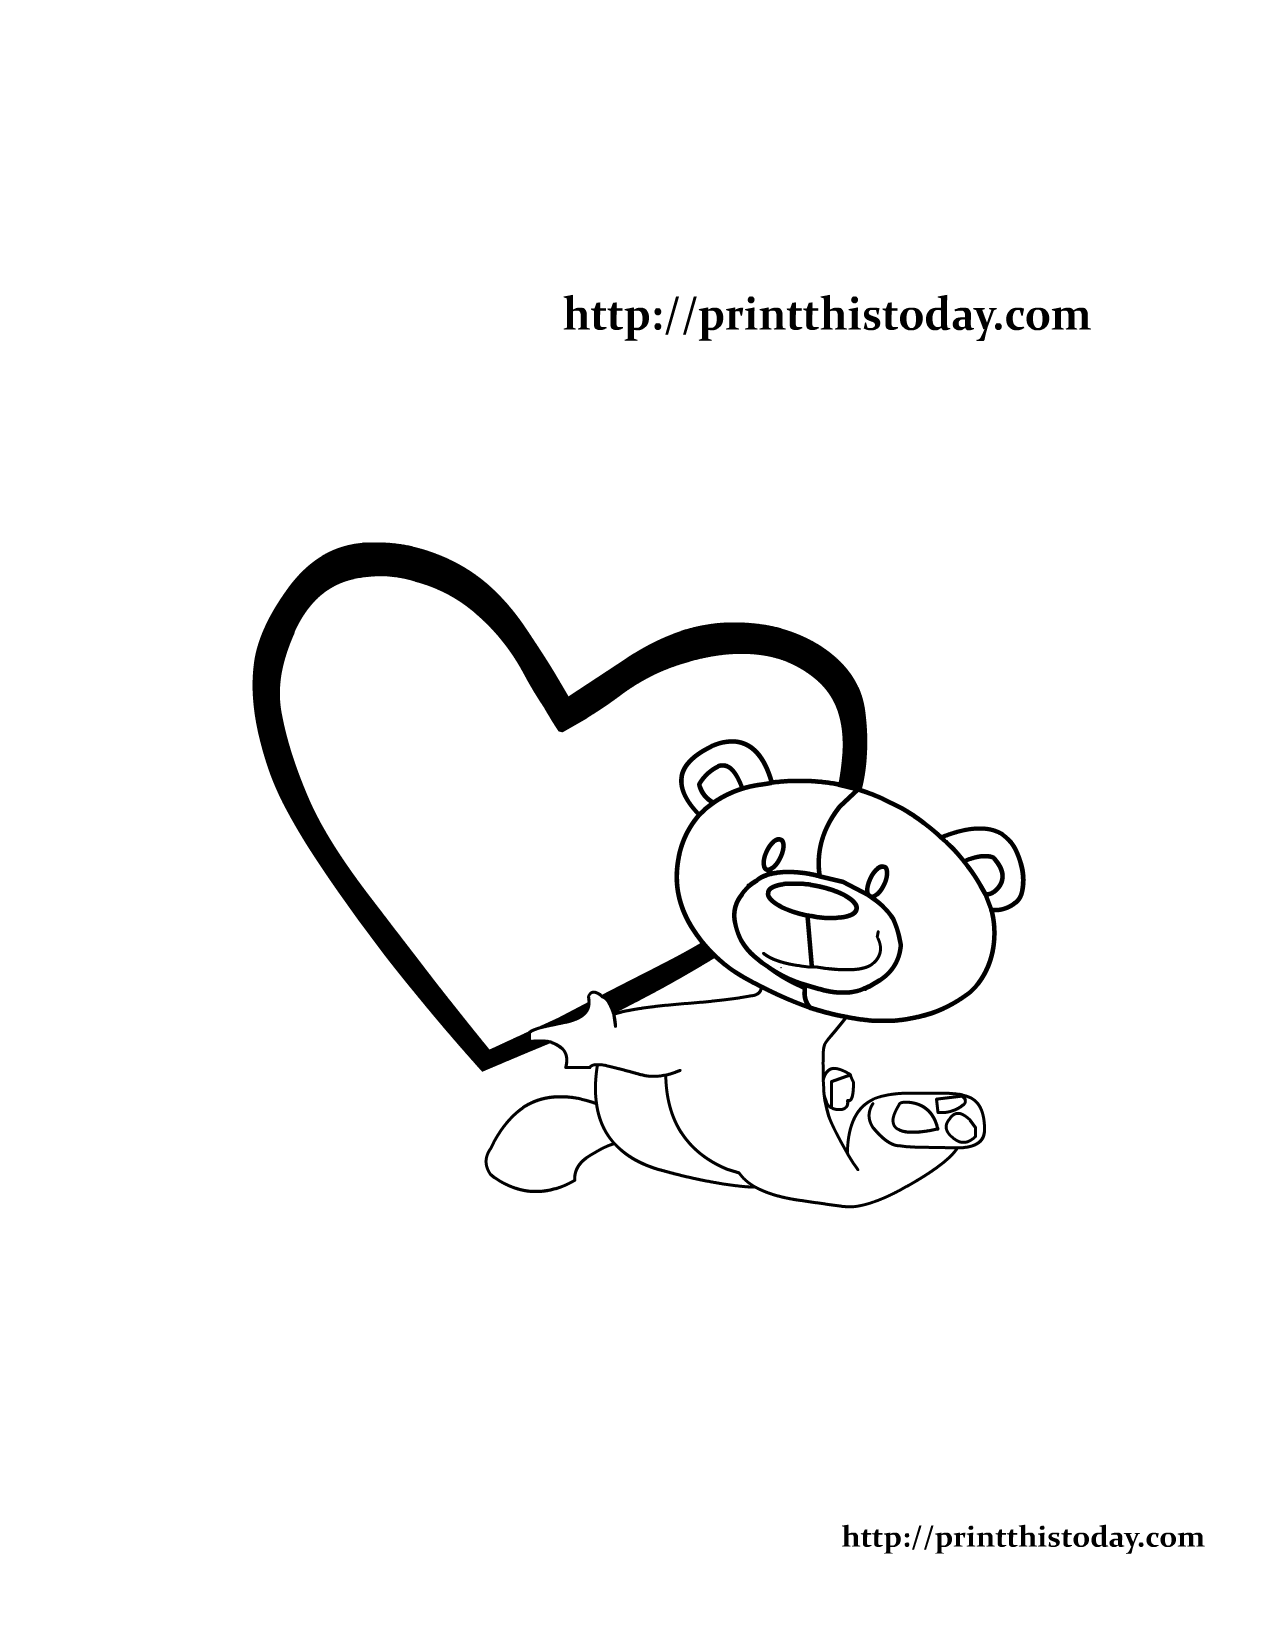 Adorable Teddy Bear Coloring Page